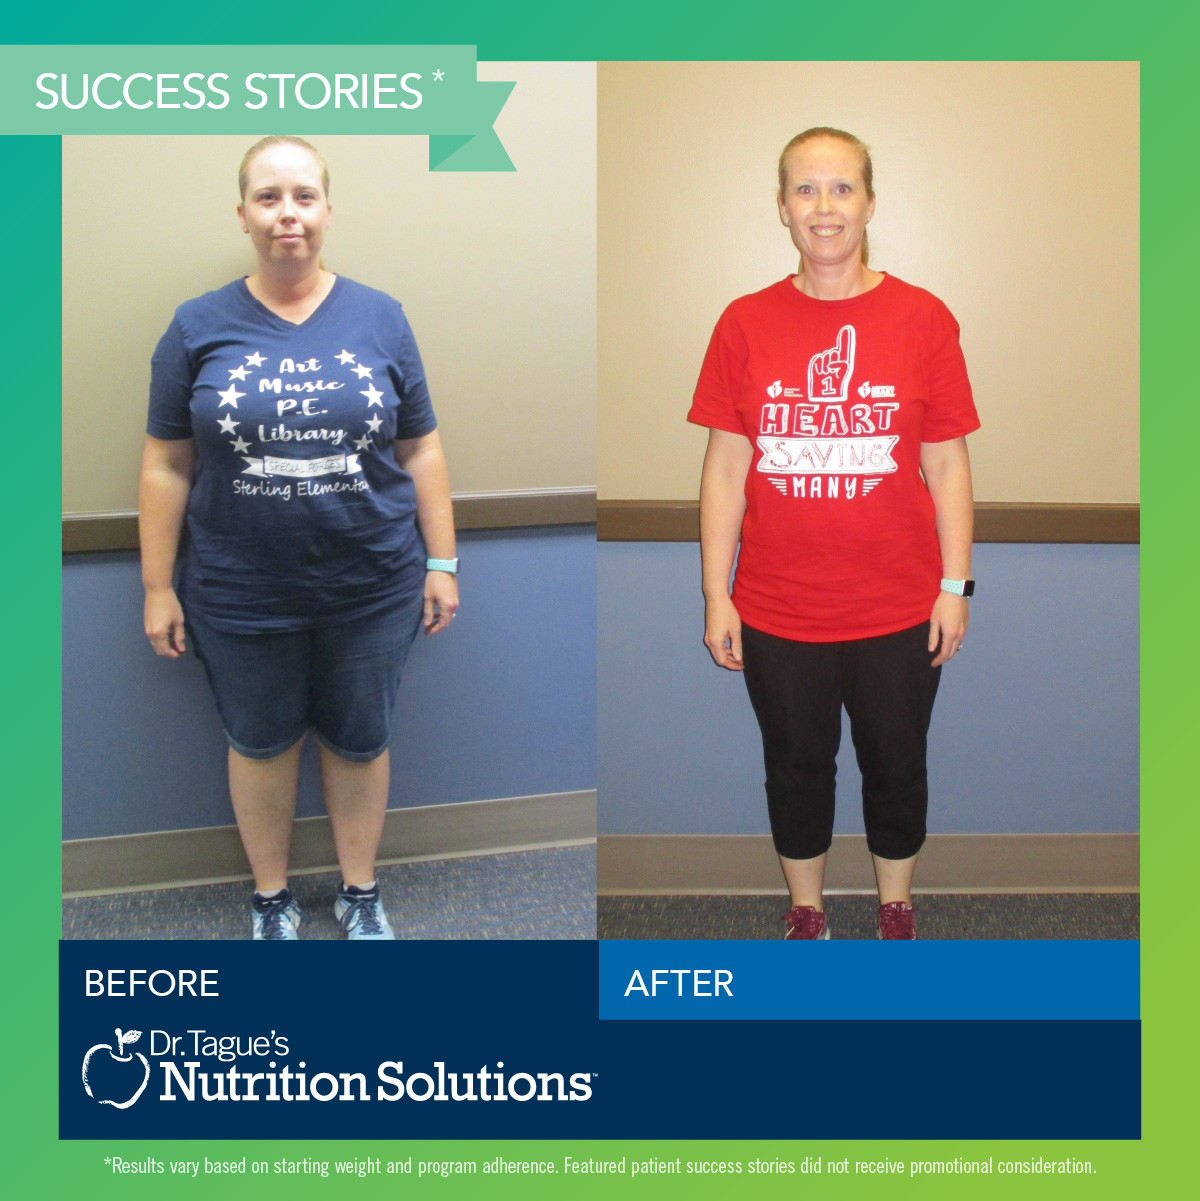 Dr. Tague's Center for Nutrition Success Stories - Amy lost 67lbs in 6 months